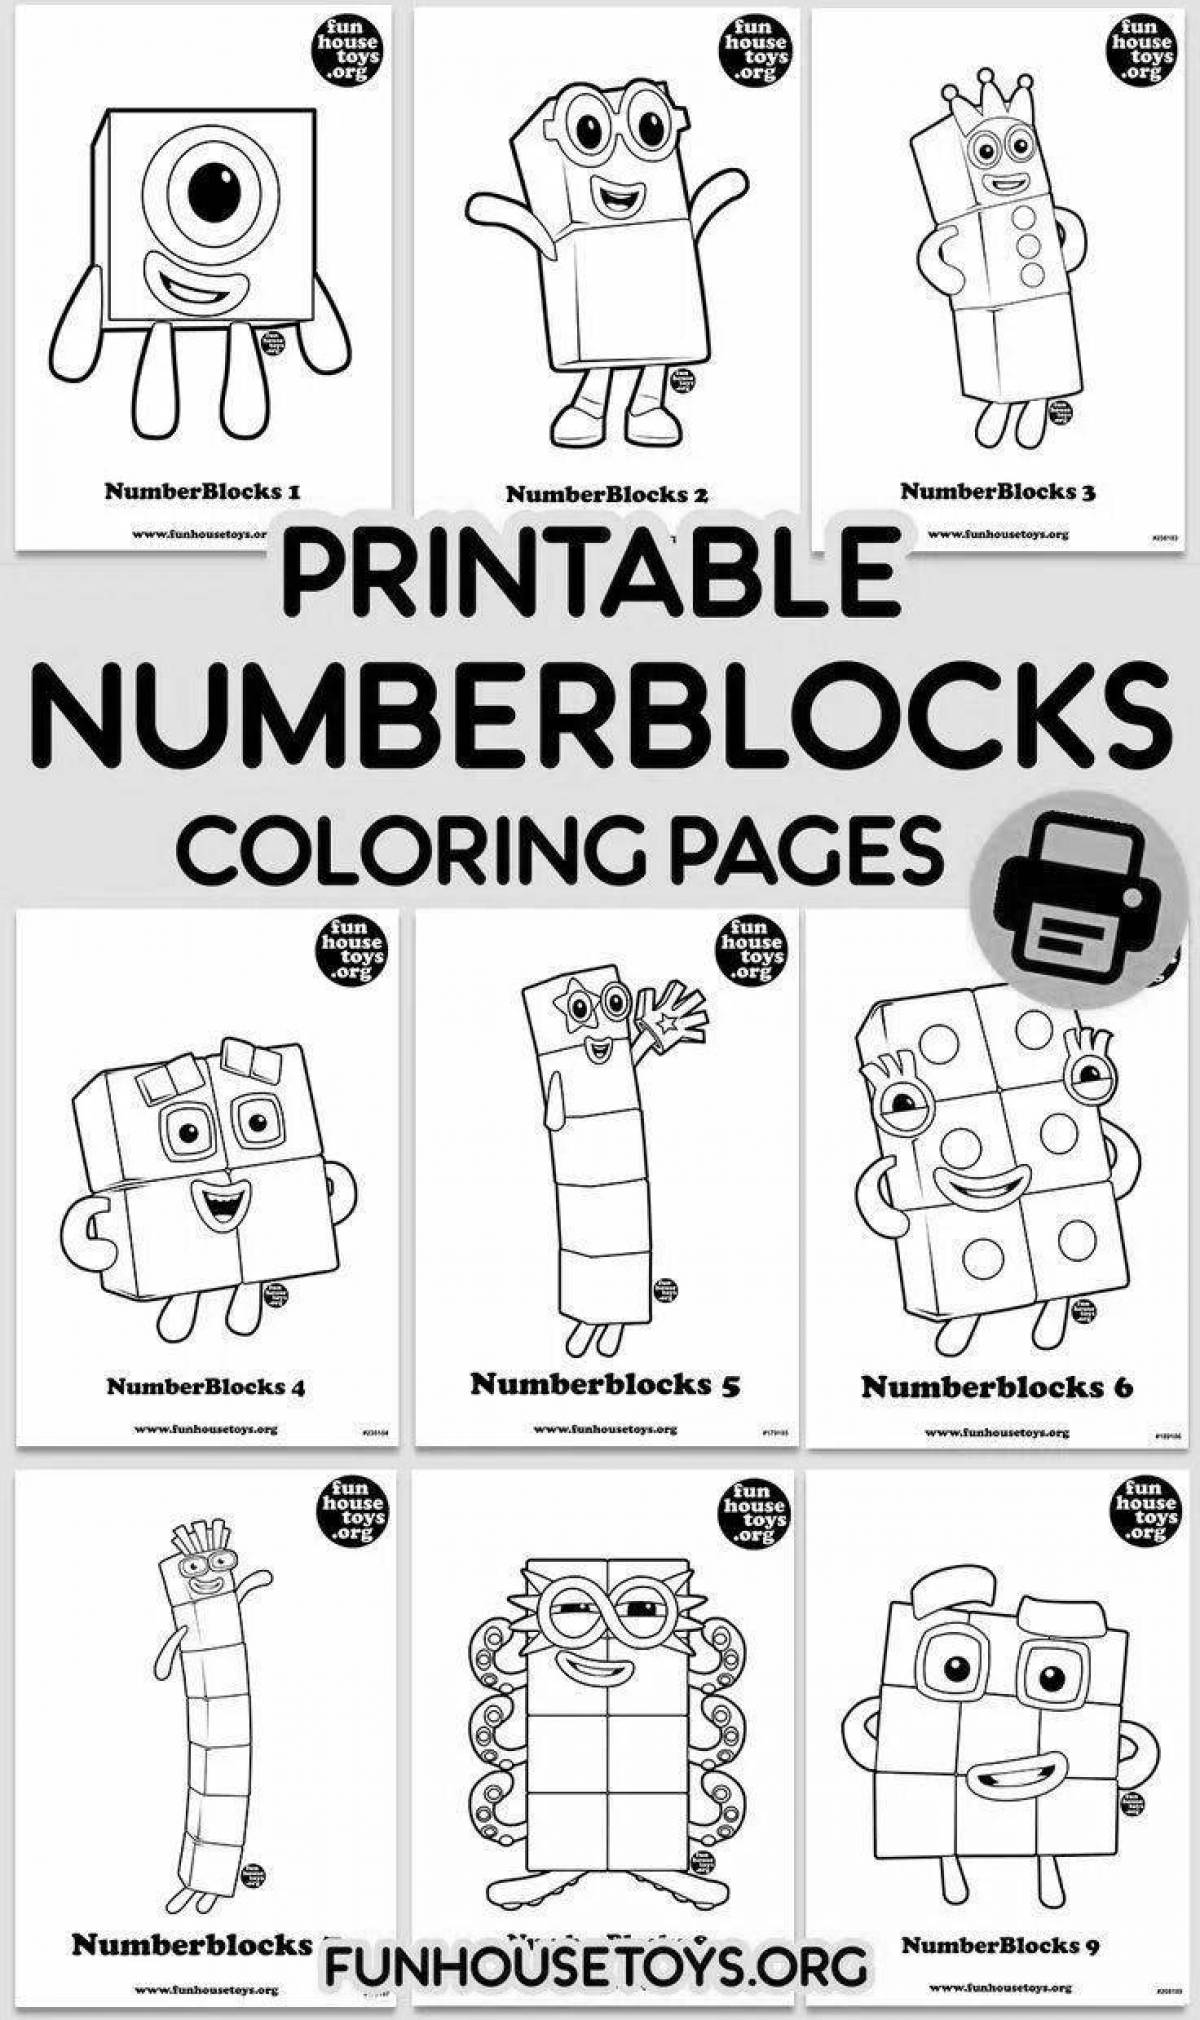 Playful number block coloring page